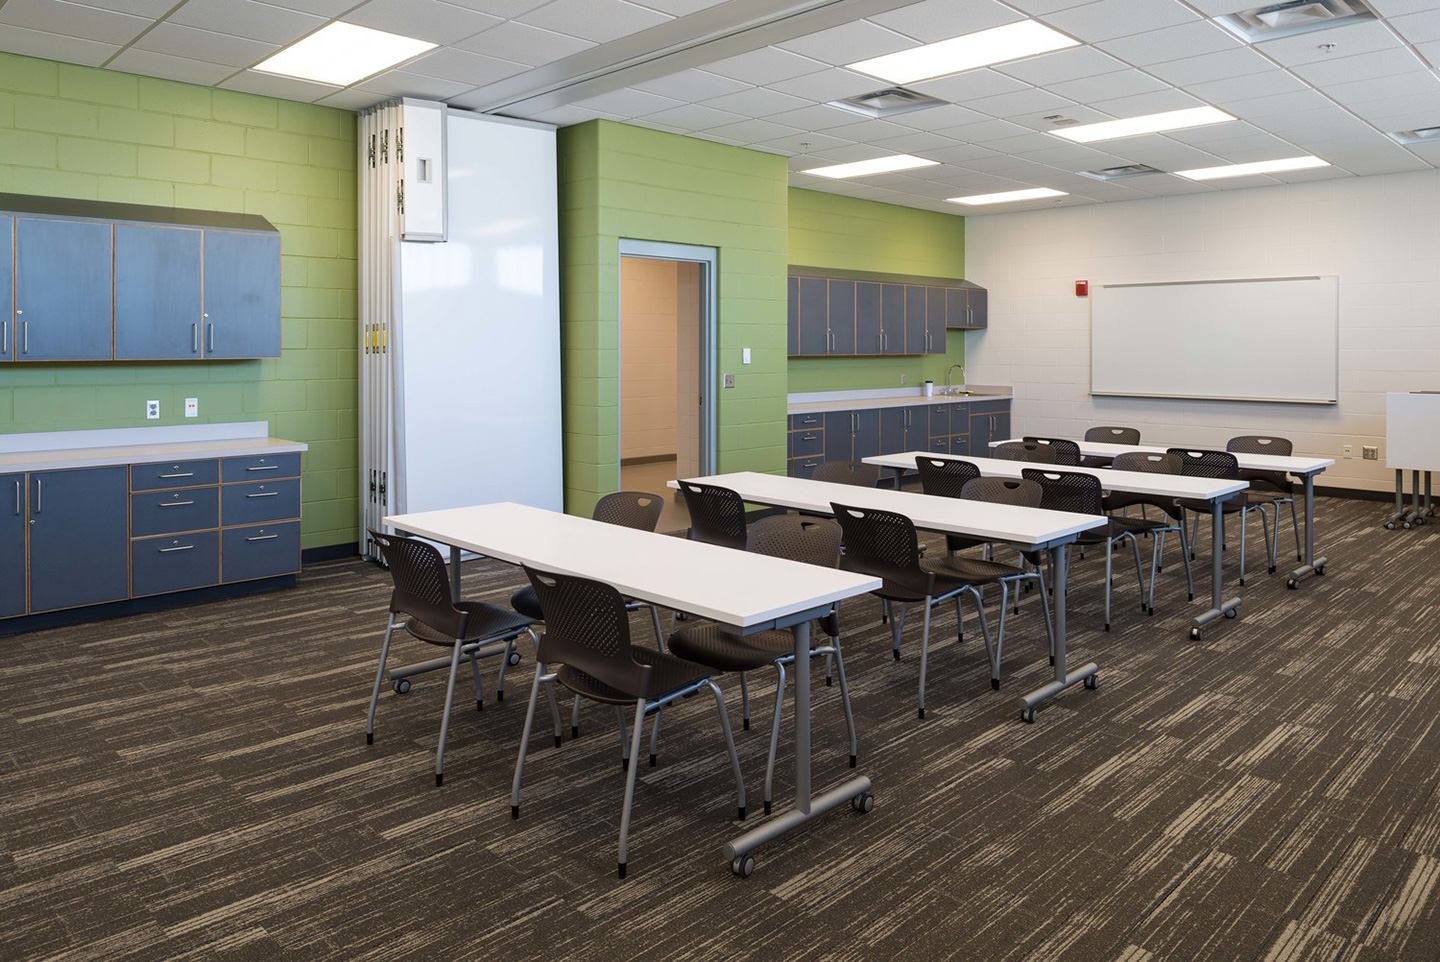 Minimum security dormitory units are separated by work release (outside security) and inside security units – each with common dining, recreational, and educational areas.